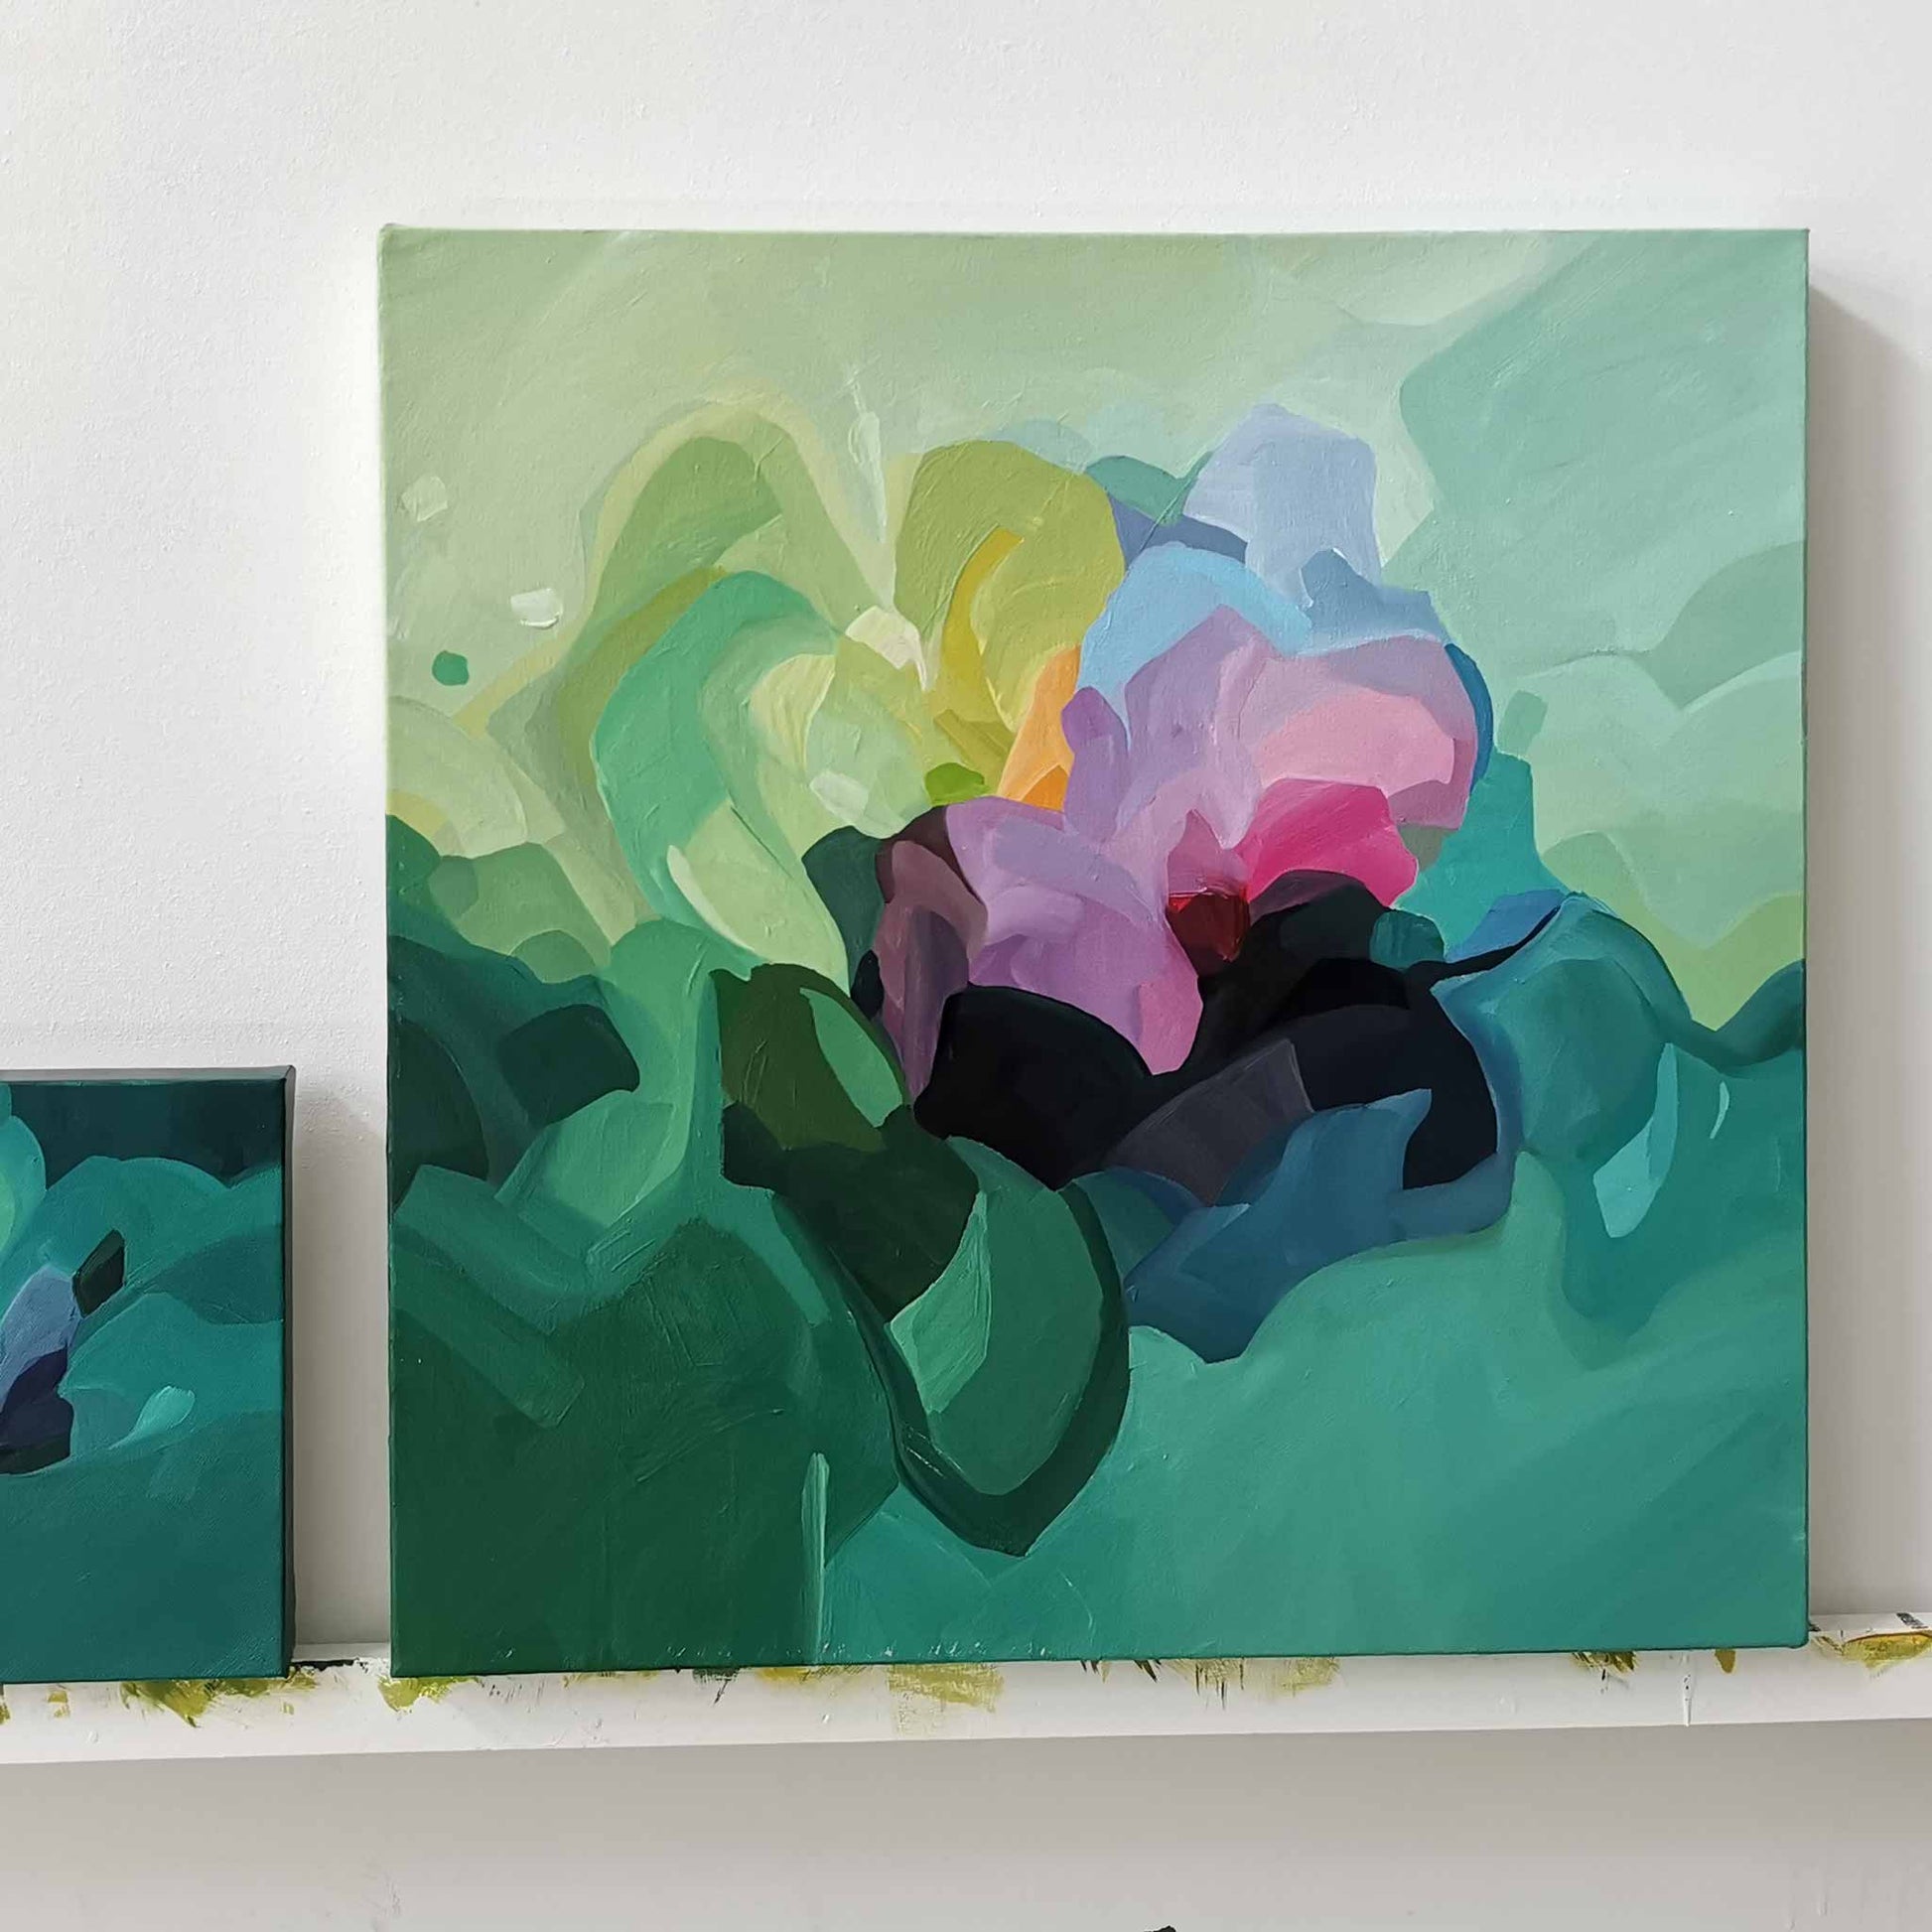 colourful jade green abstract painting on canvas is studio by Canadian artist Susannah Bleasby